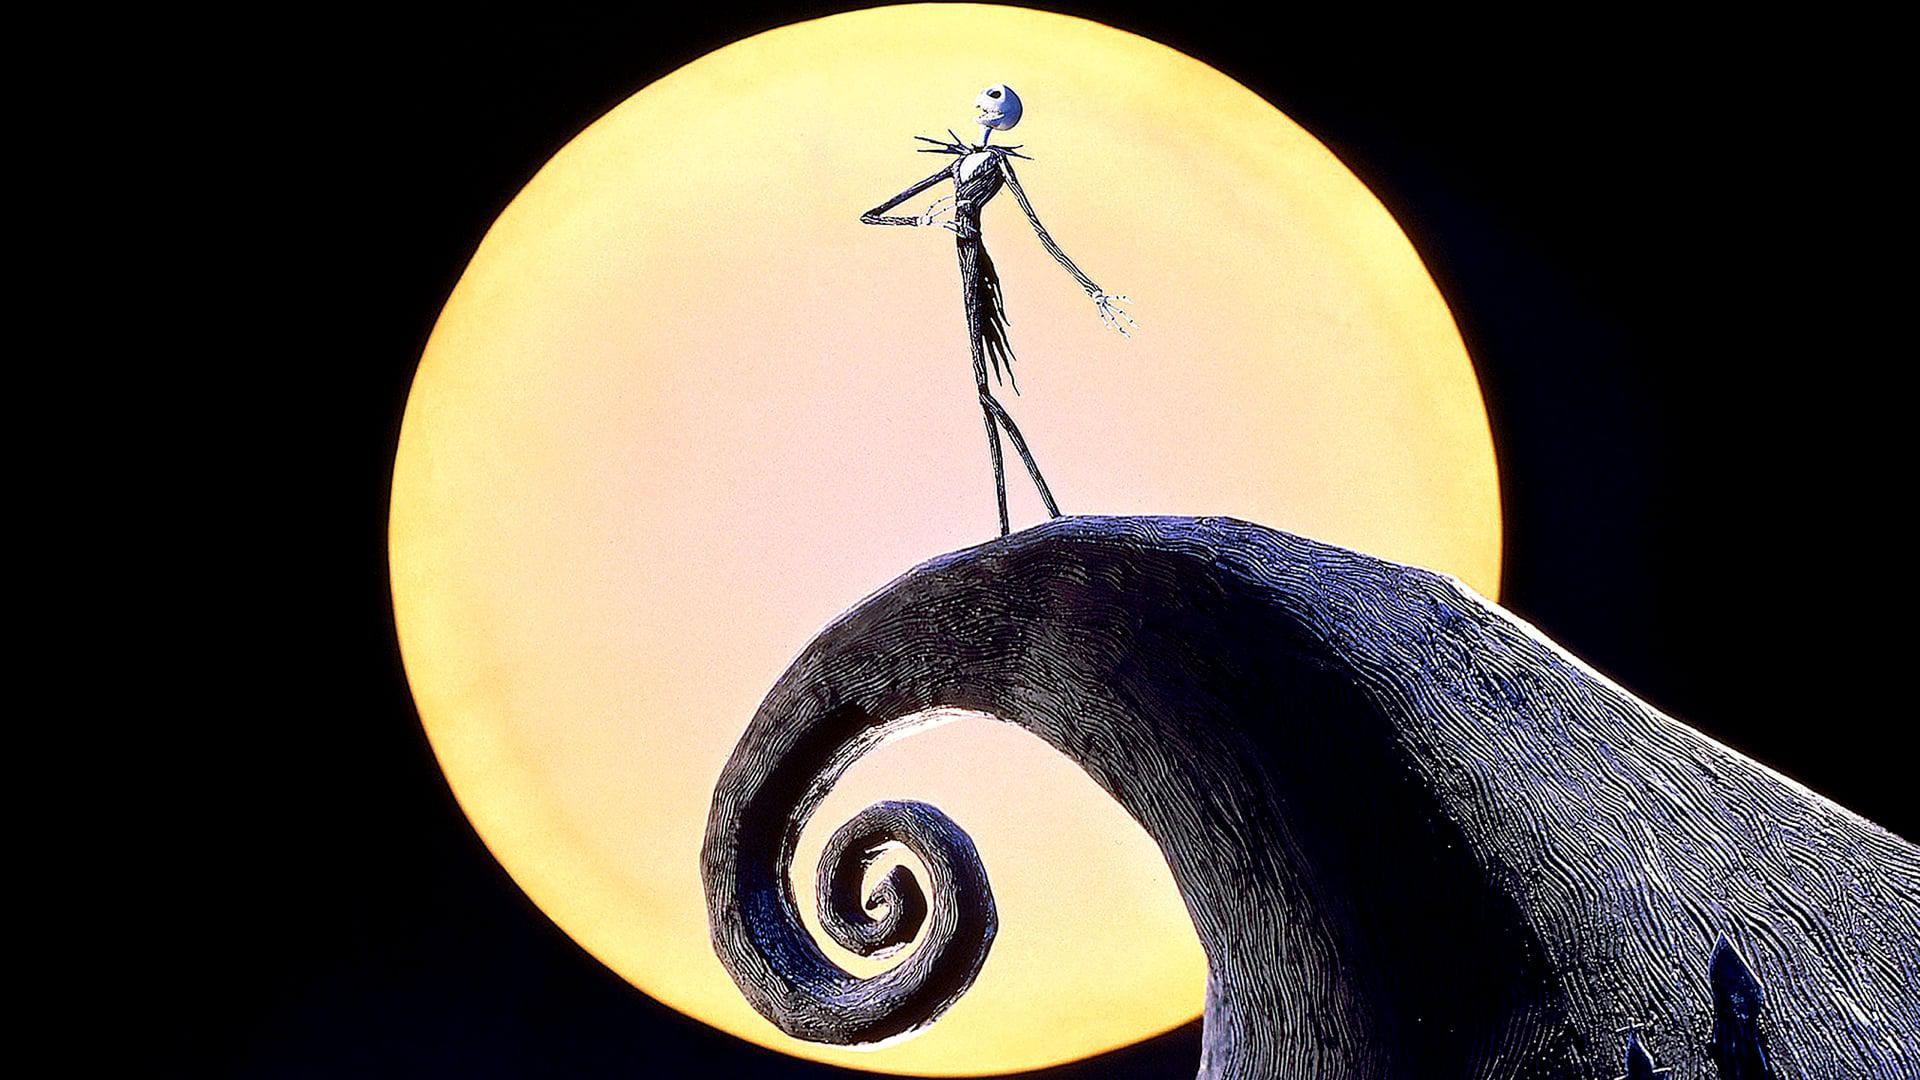 Backdrop Image for Nightmare before Christmas